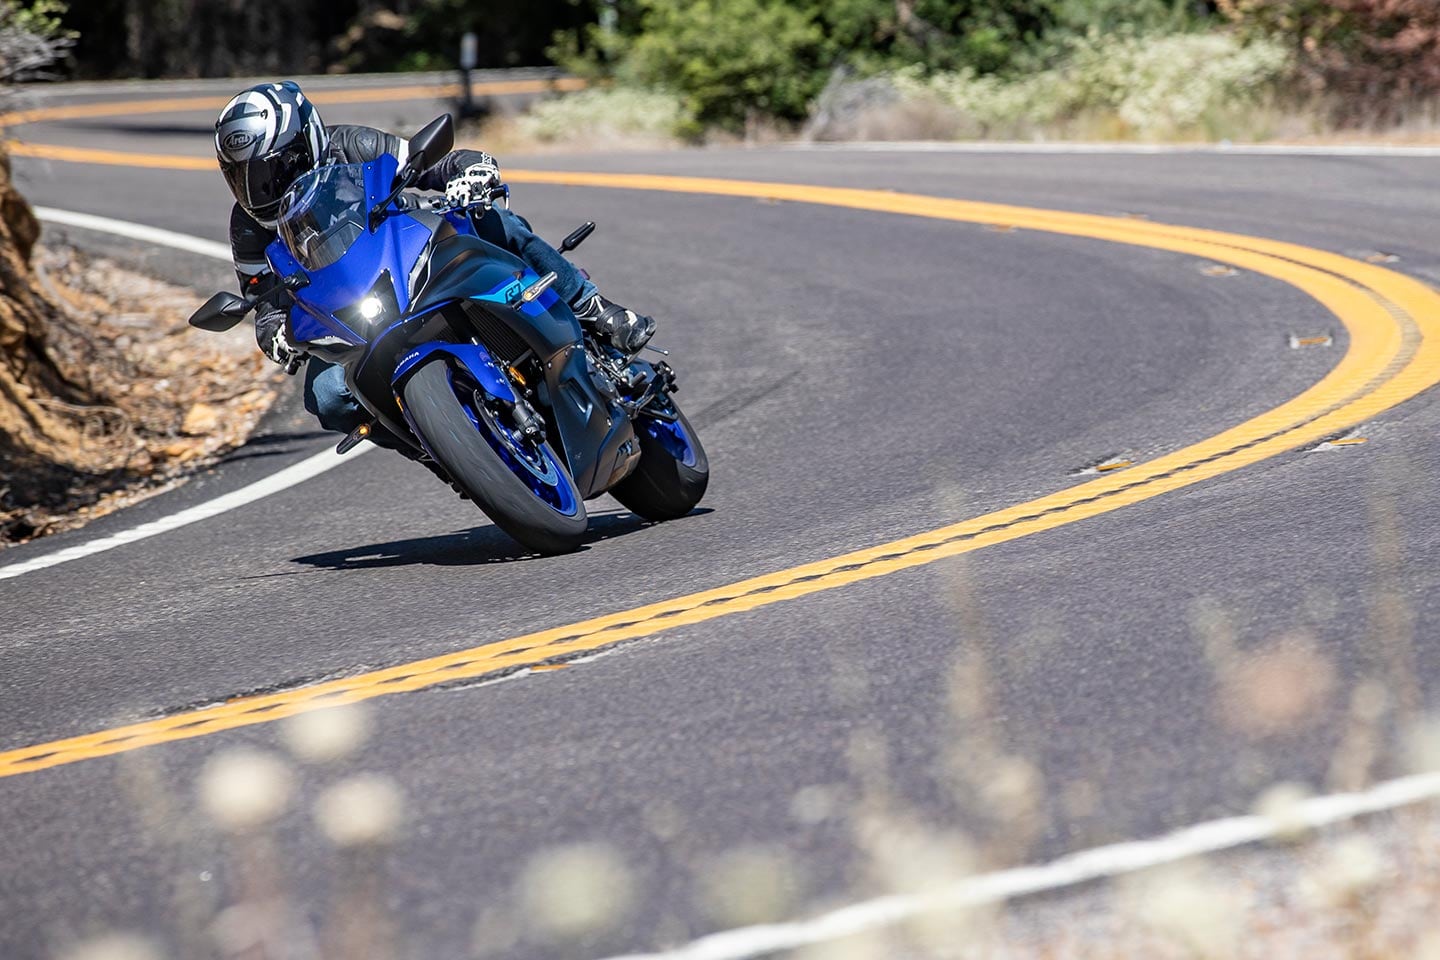 Yamaha’s R7 is light and agile and feels more like a hardcore sportbike than the other bikes here.